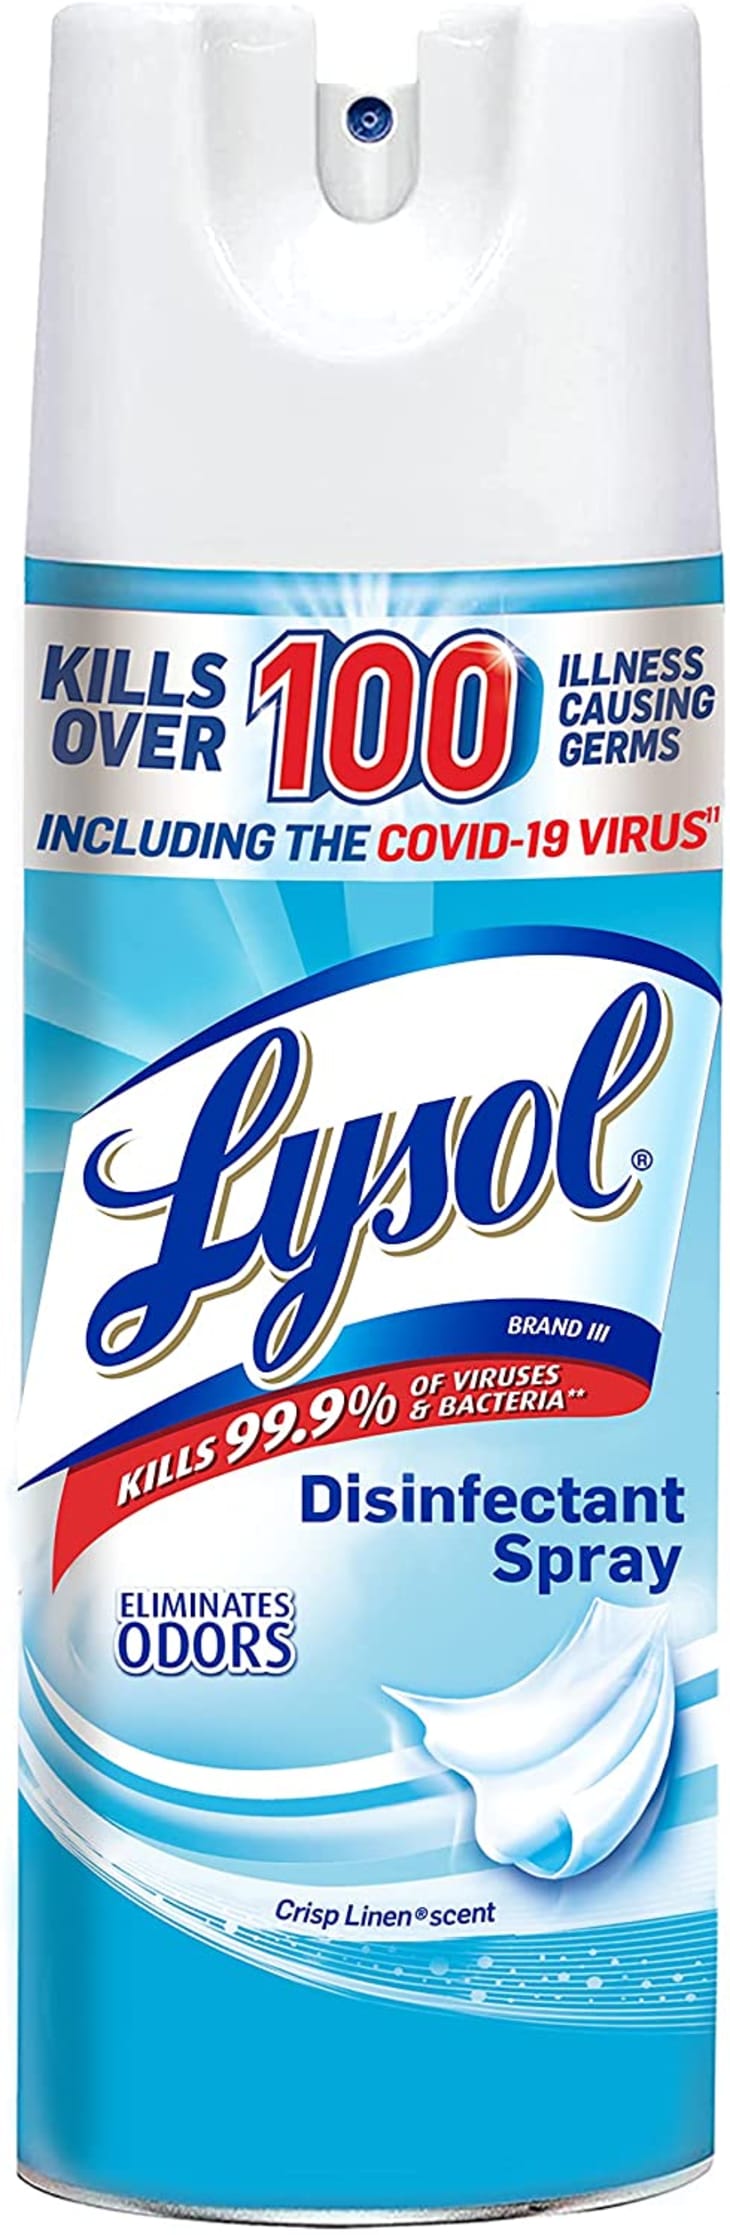 Product Image: Lysol Disinfectant Spray, Sanitizing and Antibacterial Spray